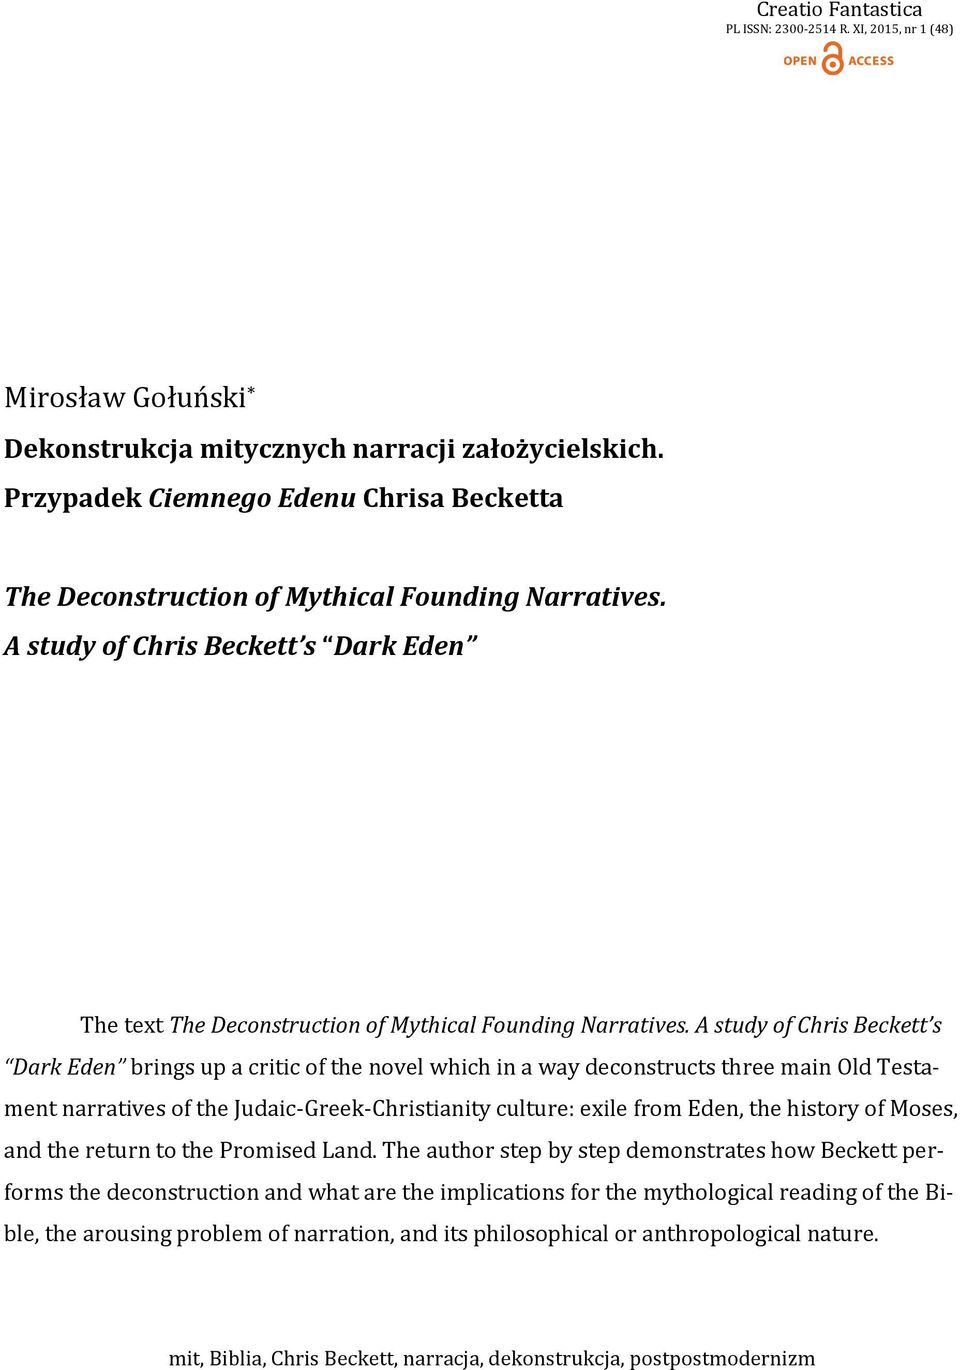 A study of Chris Beckett s Dark Eden brings up a critic of the novel which in a way deconstructs three main Old Testament narratives of the Judaic-Greek-Christianity culture: exile from Eden, the